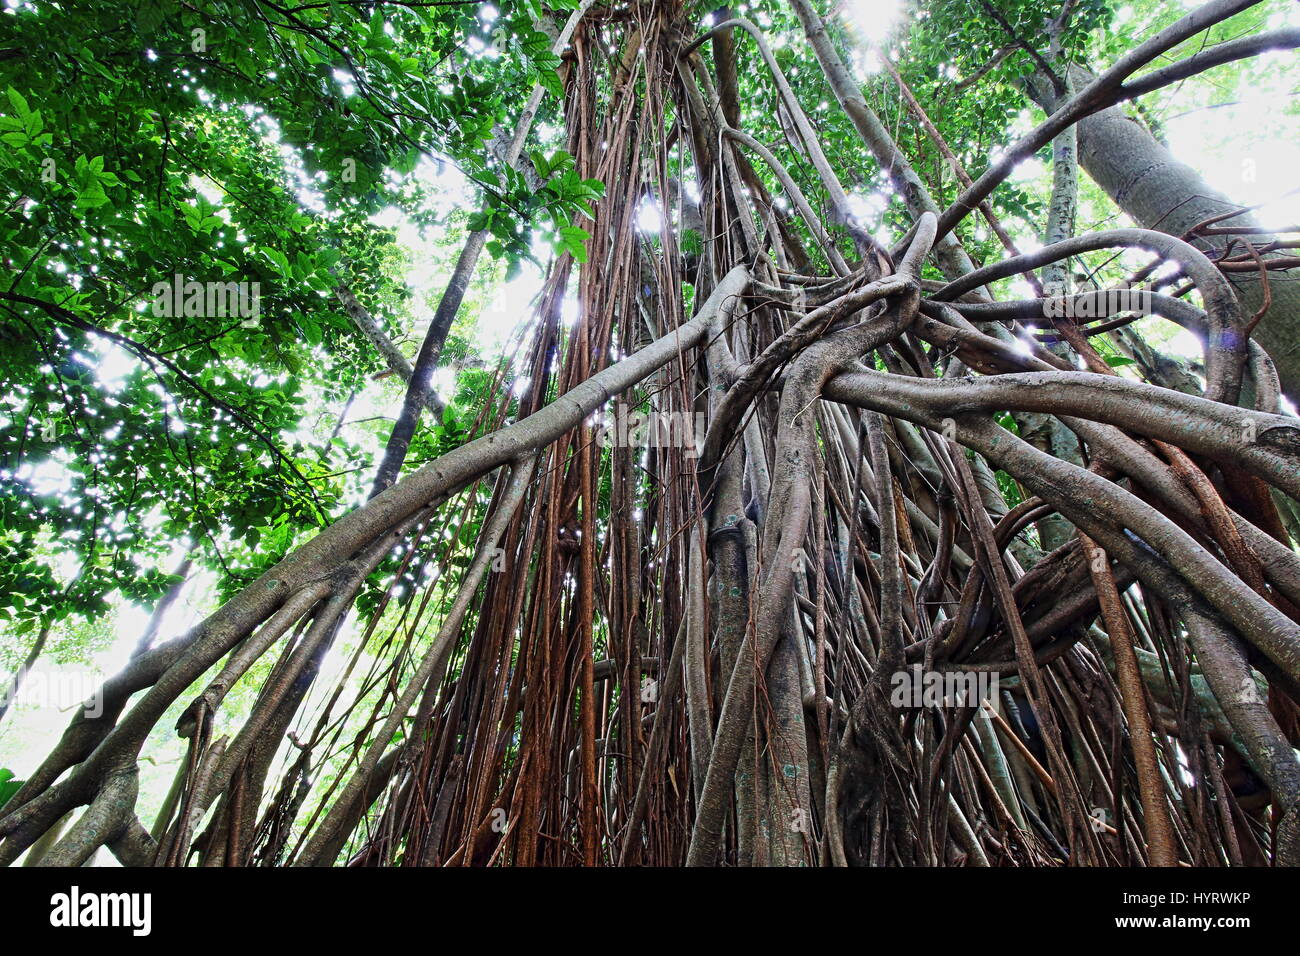 Worm's eye view of the strangling ficus roots Stock Photo